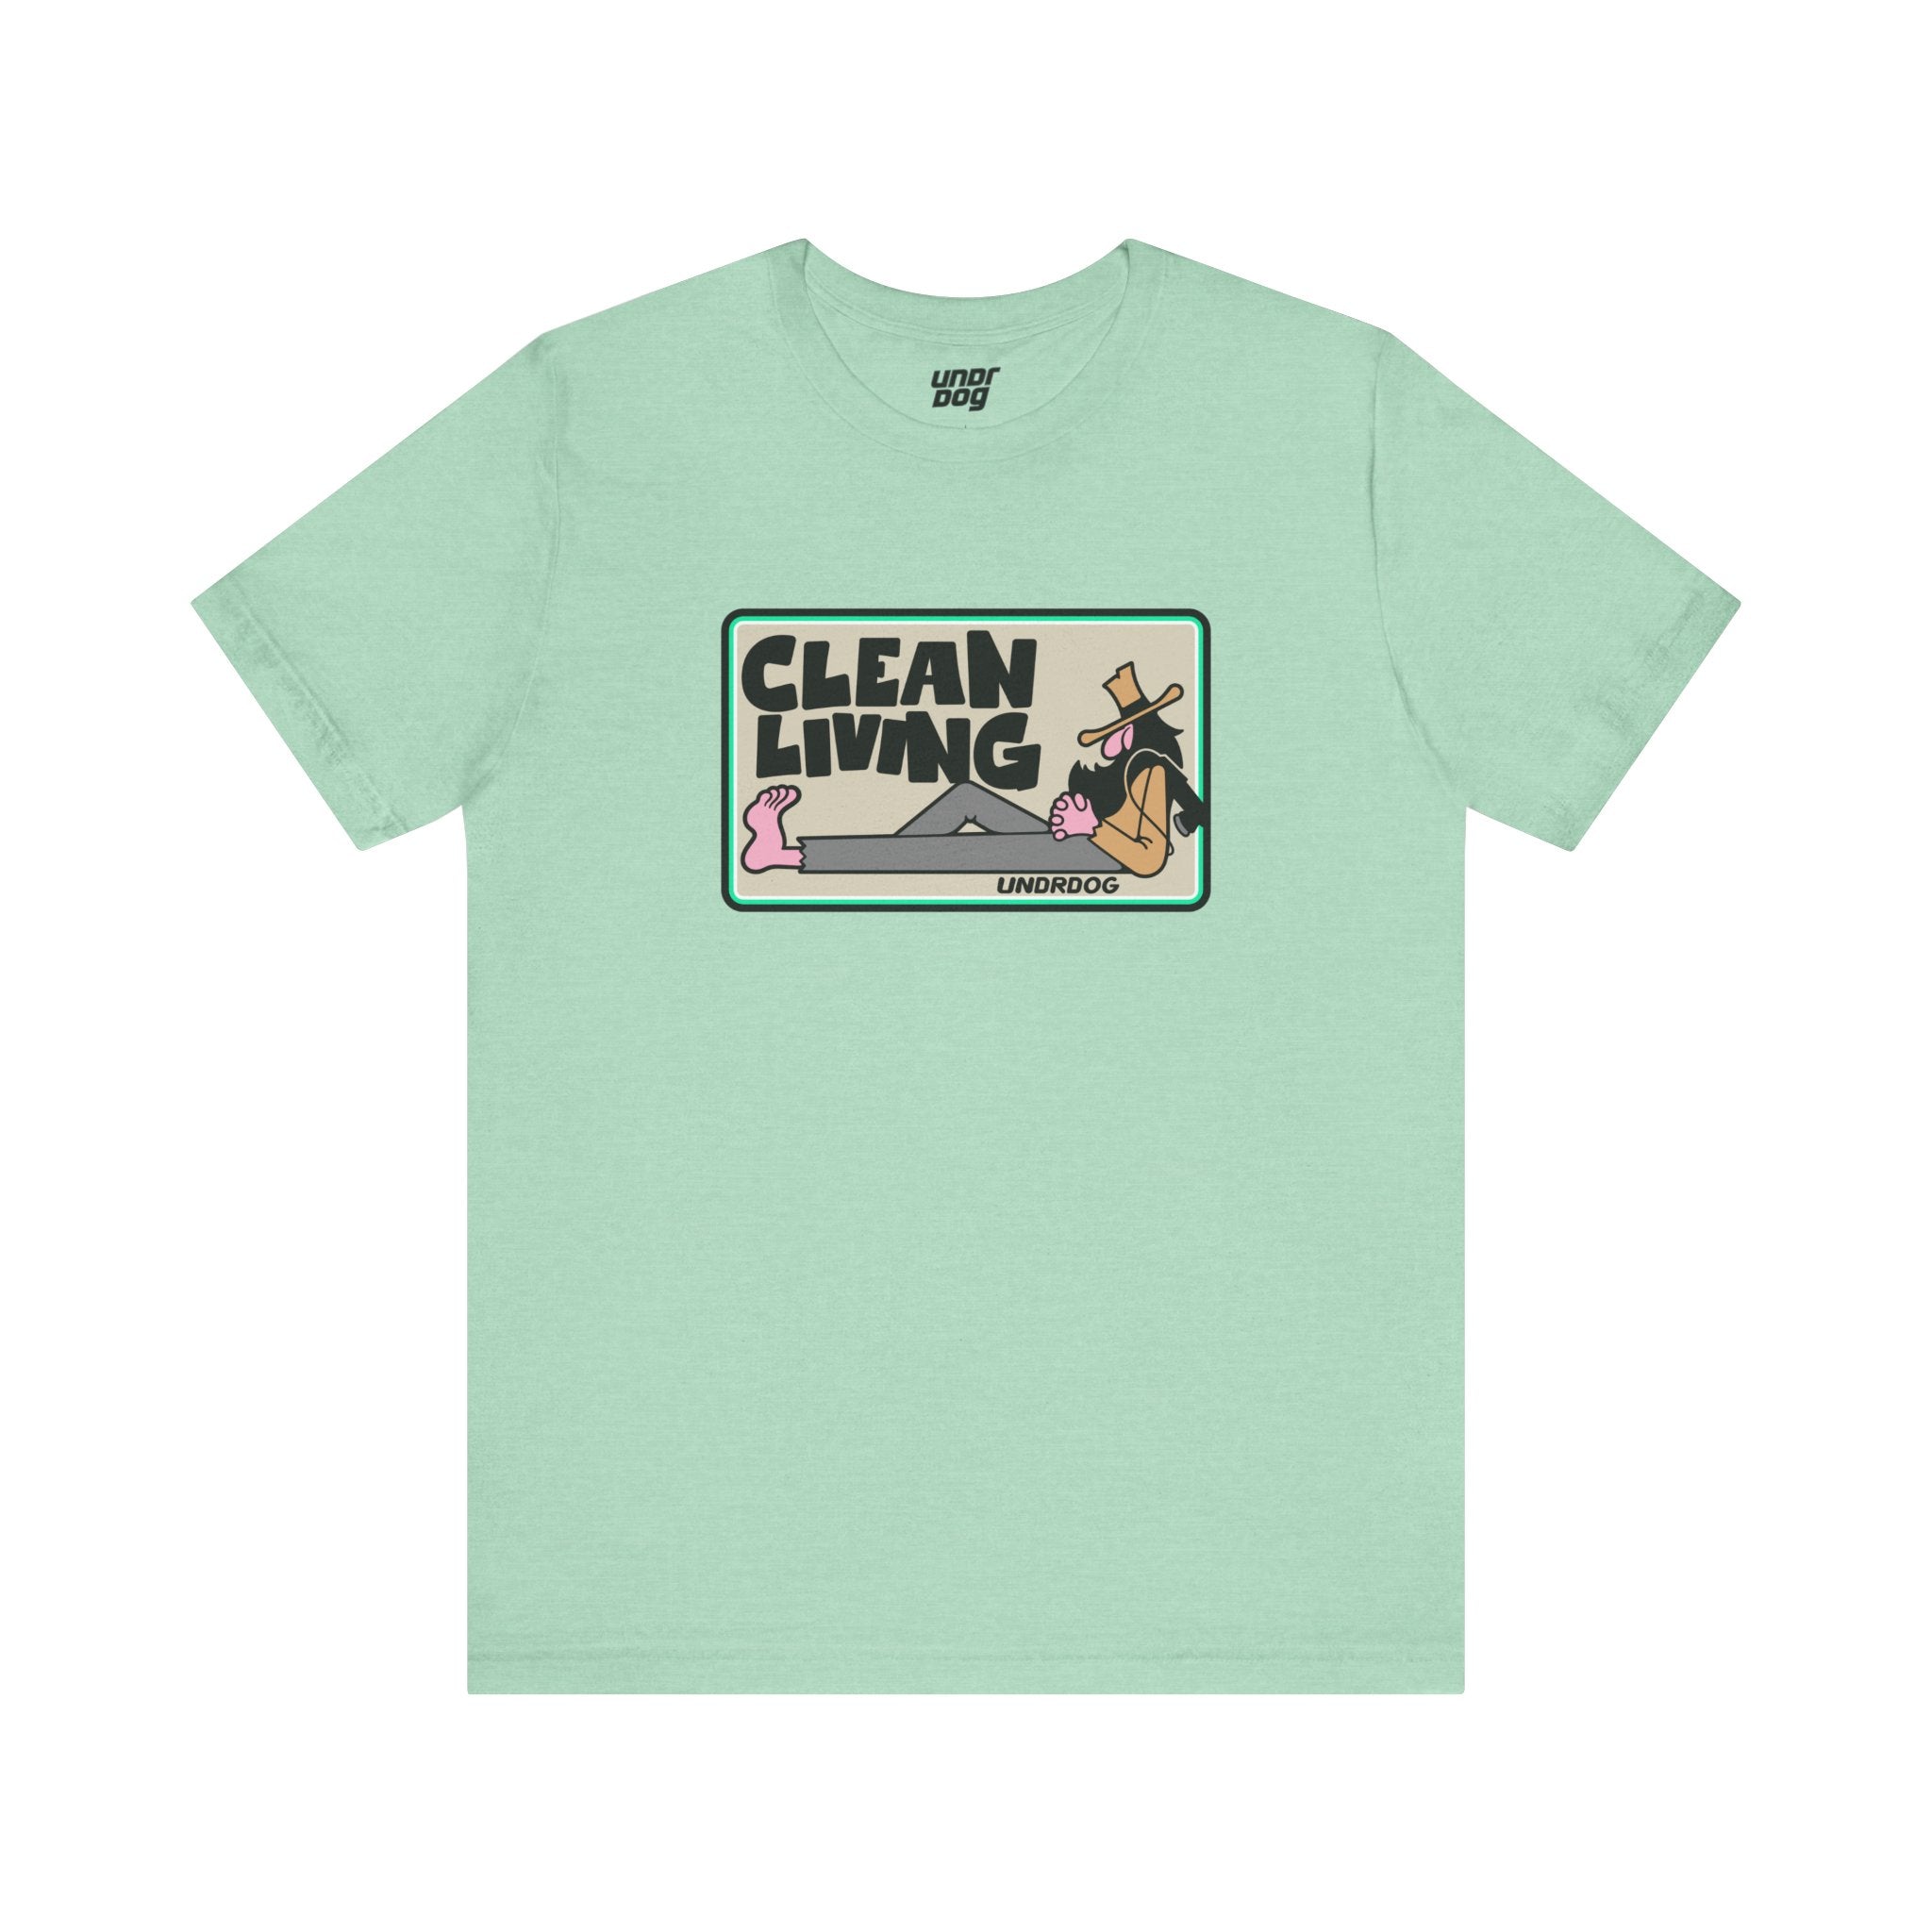 8741444359525485431_2048.jpg - Clean Living v3 by Undrdog Tee - Undrdog Surface Products